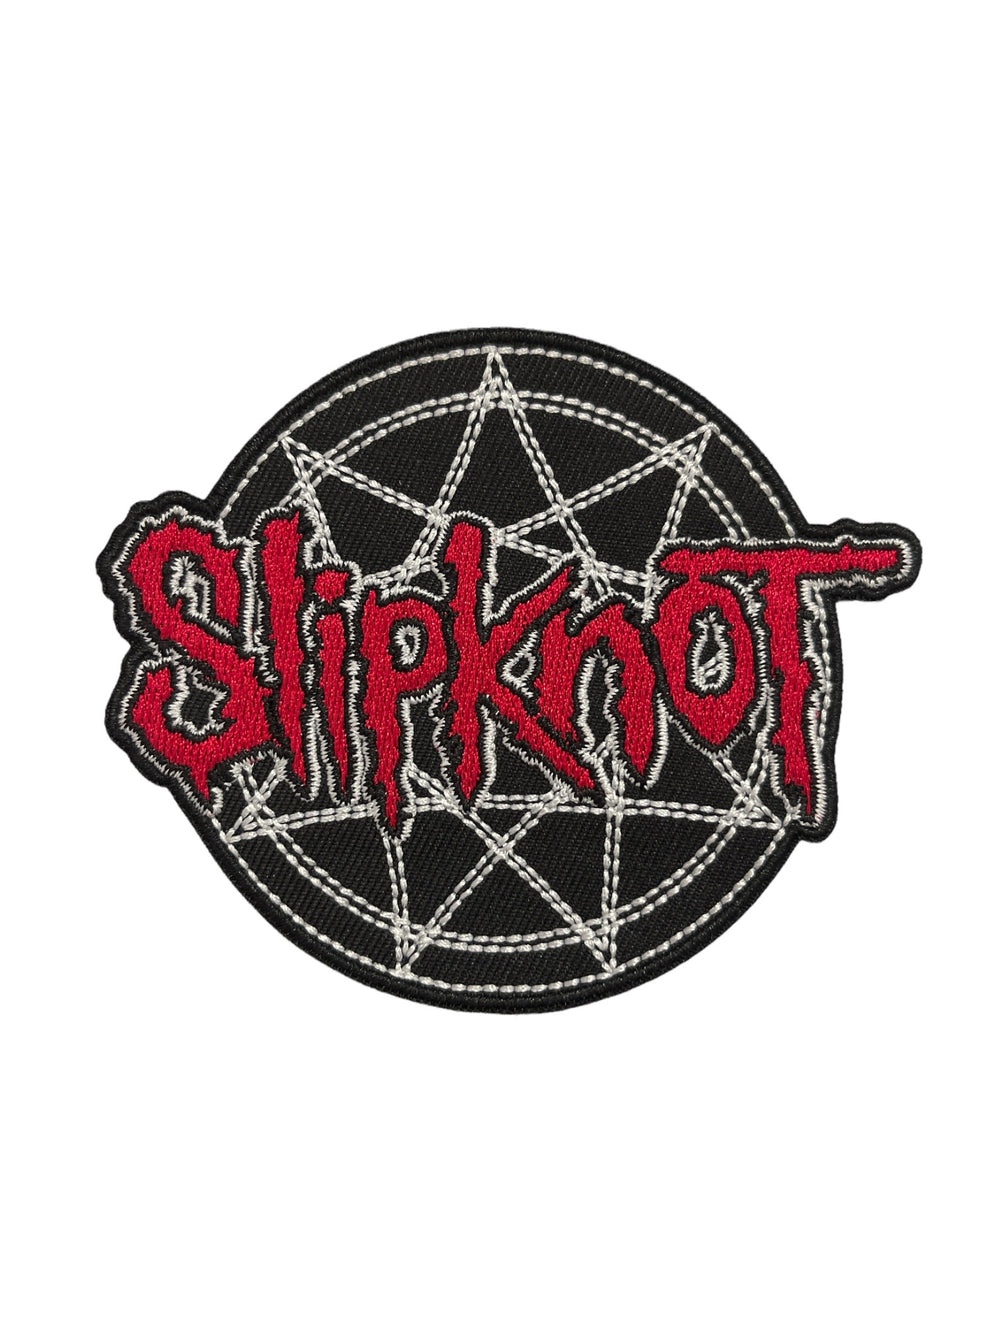 Slipknot Red Logo Over Nonogram Official Woven Patch Brand New